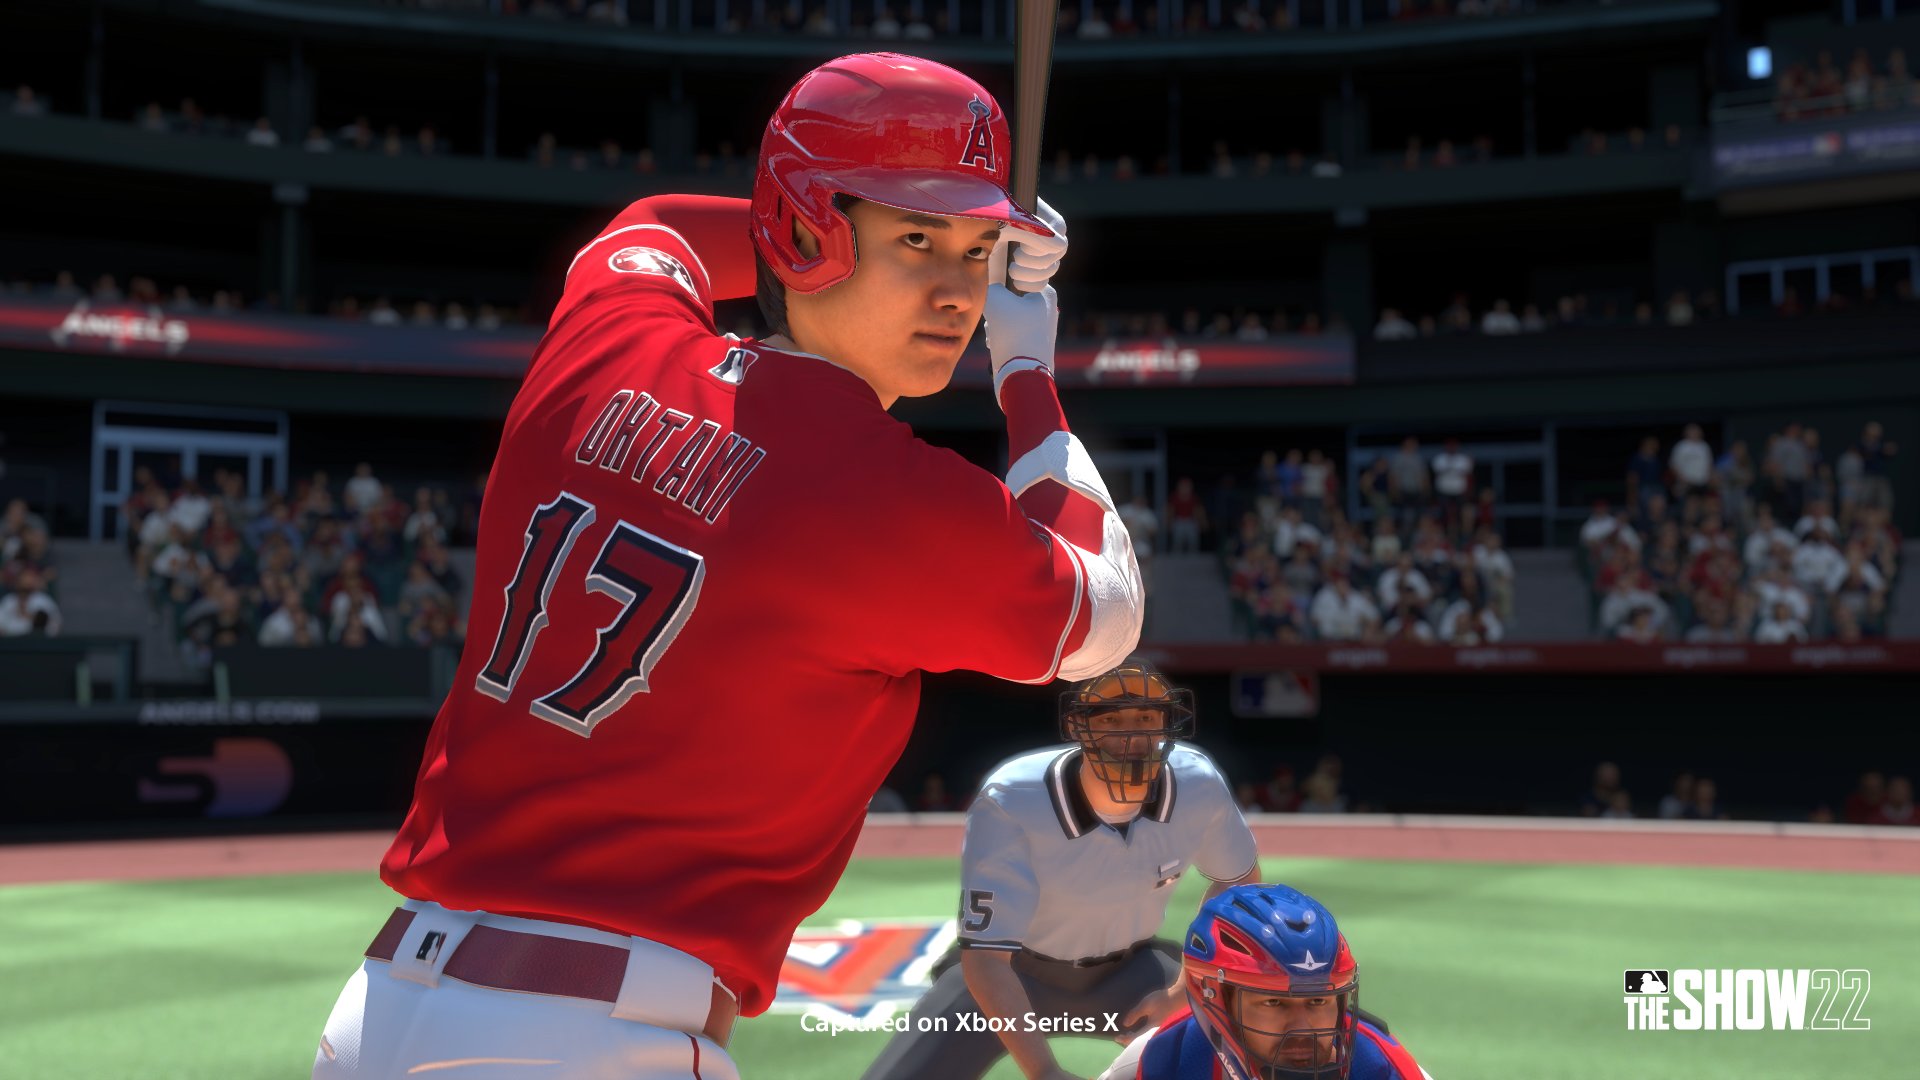 How To Customize Team Uniforms And Team Names In Diamond Dynasty! 